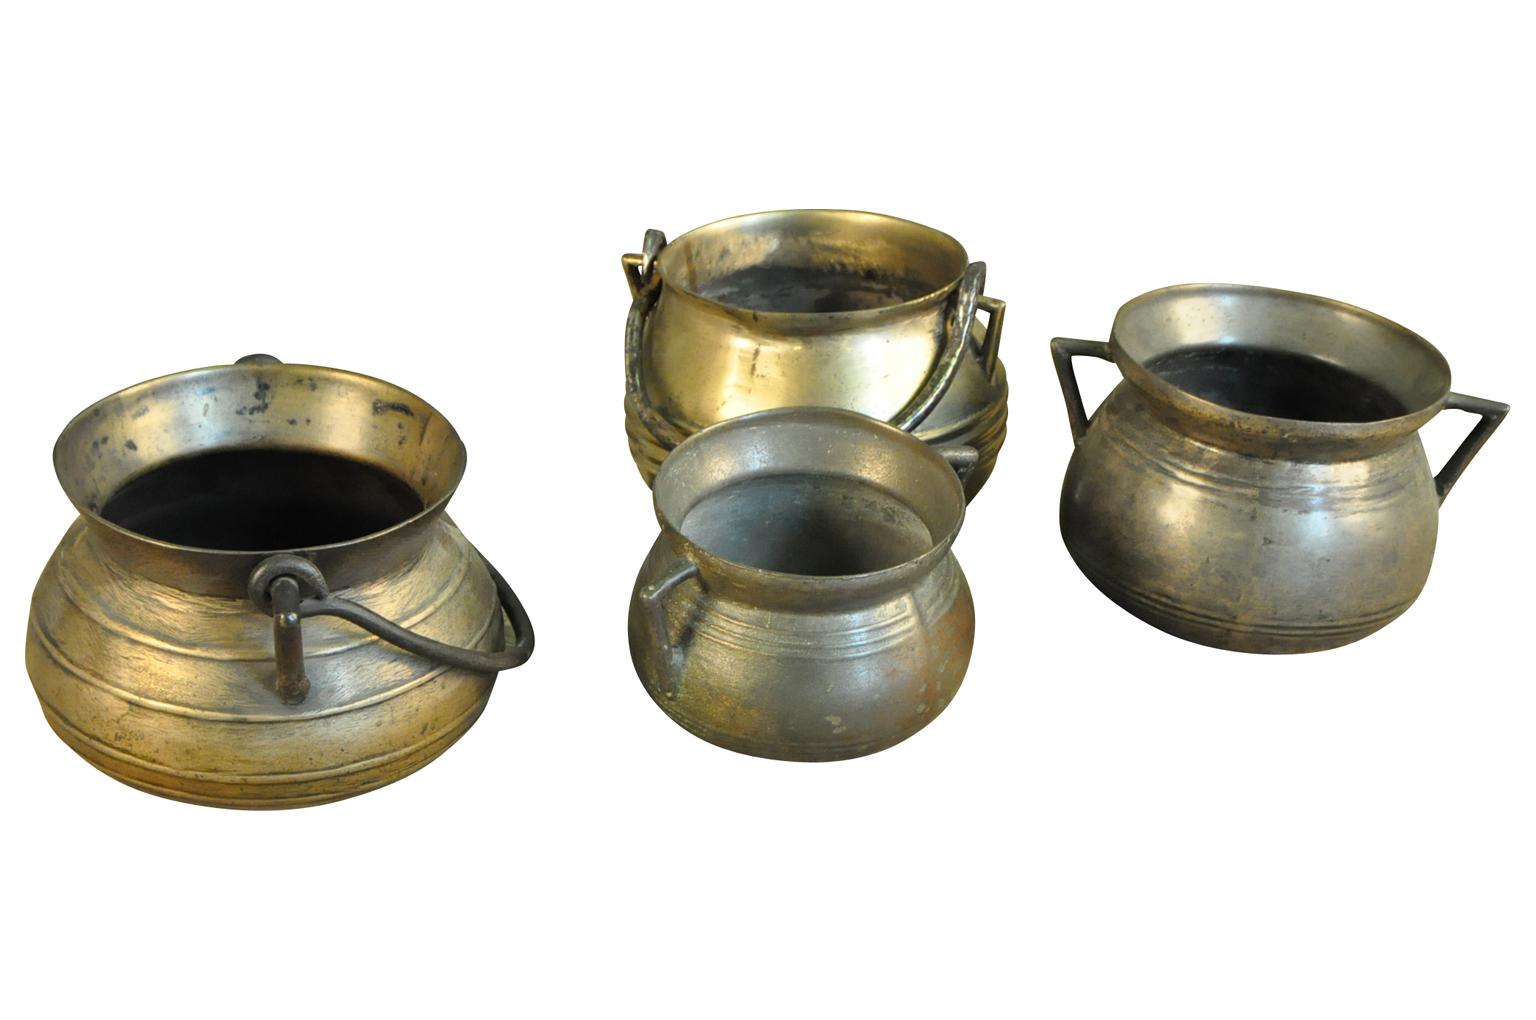 A wonderful collection of 18th century Olas - cooking pots from the Catalan region of Spain. Beautifully crafted from bronze. A stunning table top collection. The pieces range is size from the smallest Ola measuring 5 5/8